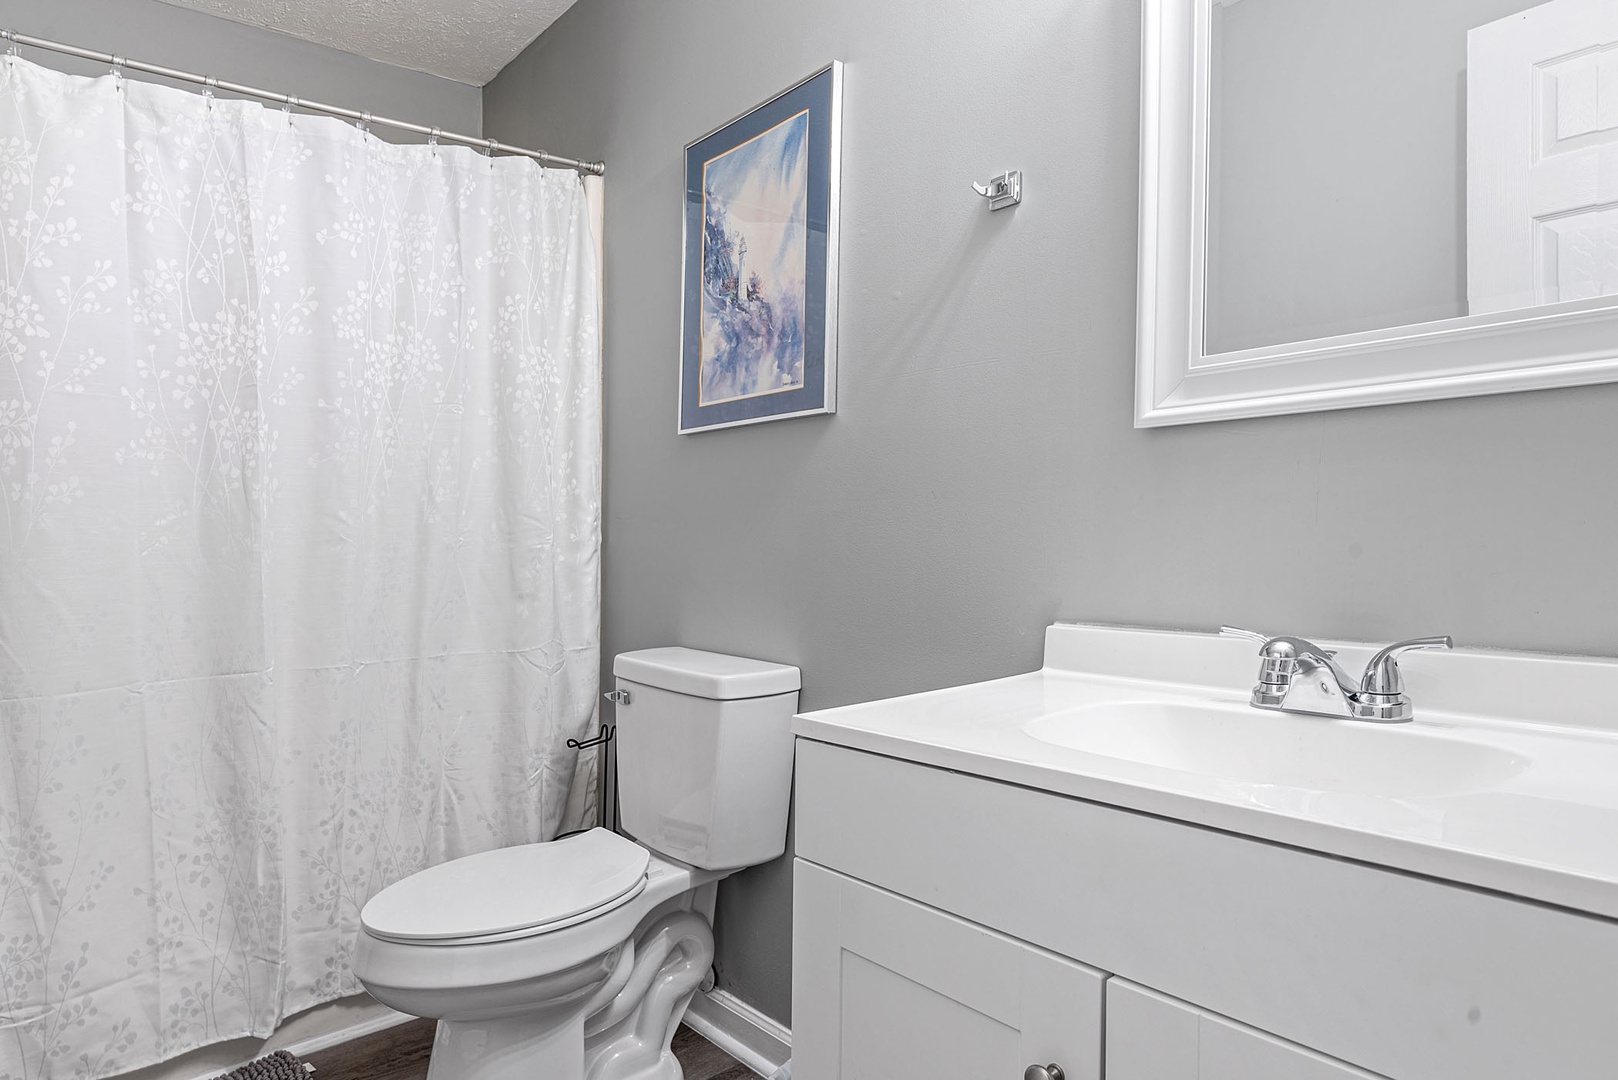 This home's full bathroom offers a single vanity & showertub combo